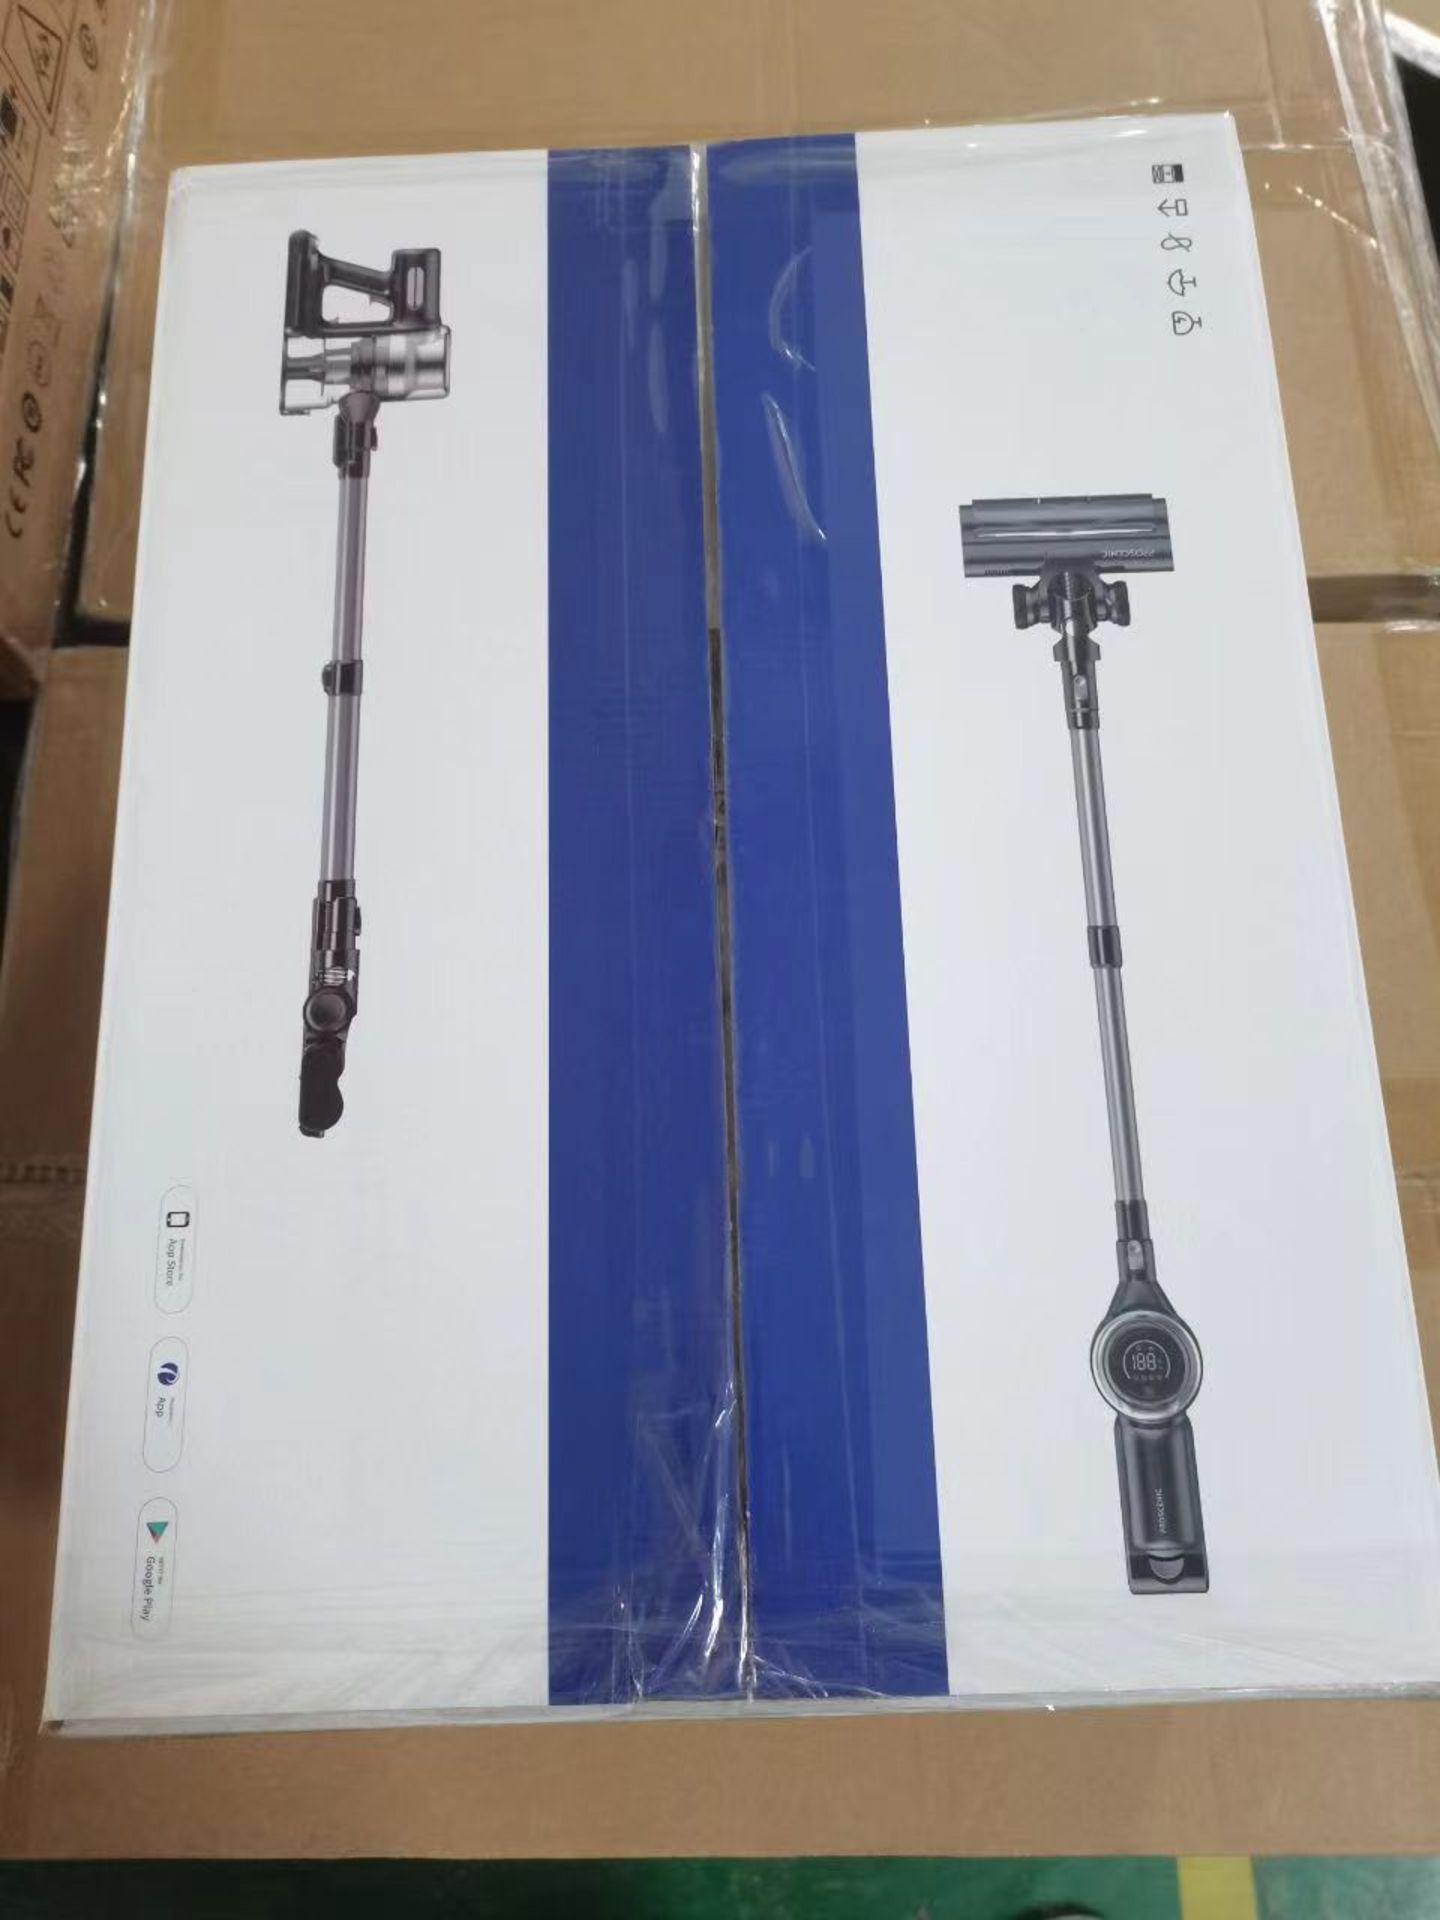 TRADE LOT 4 x New & Boxed Proscenic P12 Cordless Vacuum Cleaner, 33Kpa Stick Vacuum Cleaner with - Image 6 of 10